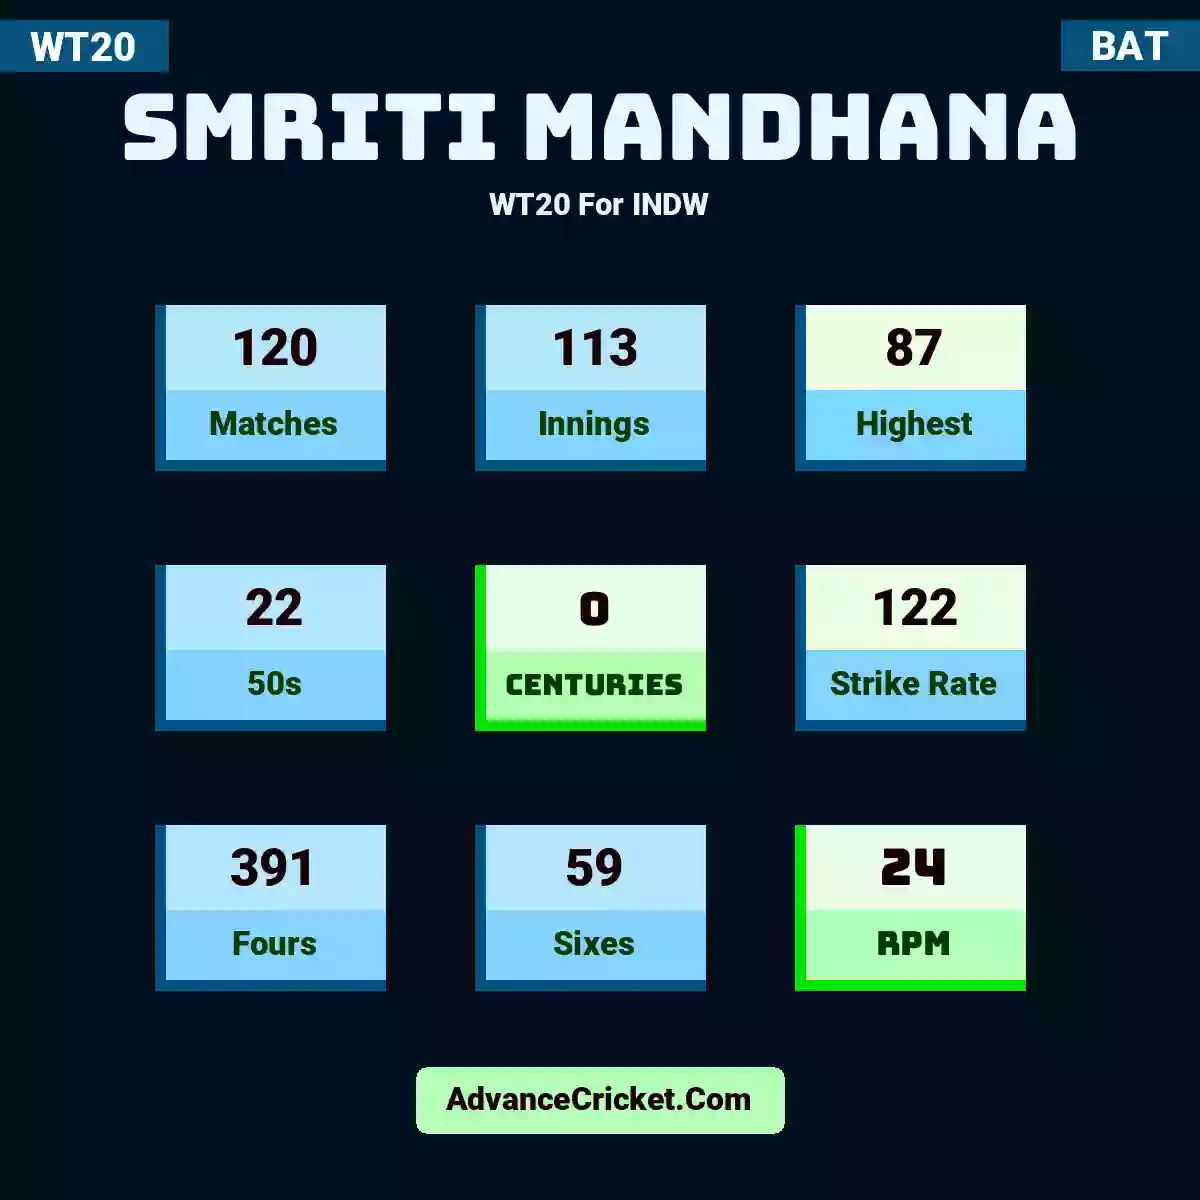 Smriti Mandhana WT20  For INDW, Smriti Mandhana played 120 matches, scored 87 runs as highest, 22 half-centuries, and 0 centuries, with a strike rate of 122. S.Mandhana hit 391 fours and 59 sixes, with an RPM of 24.